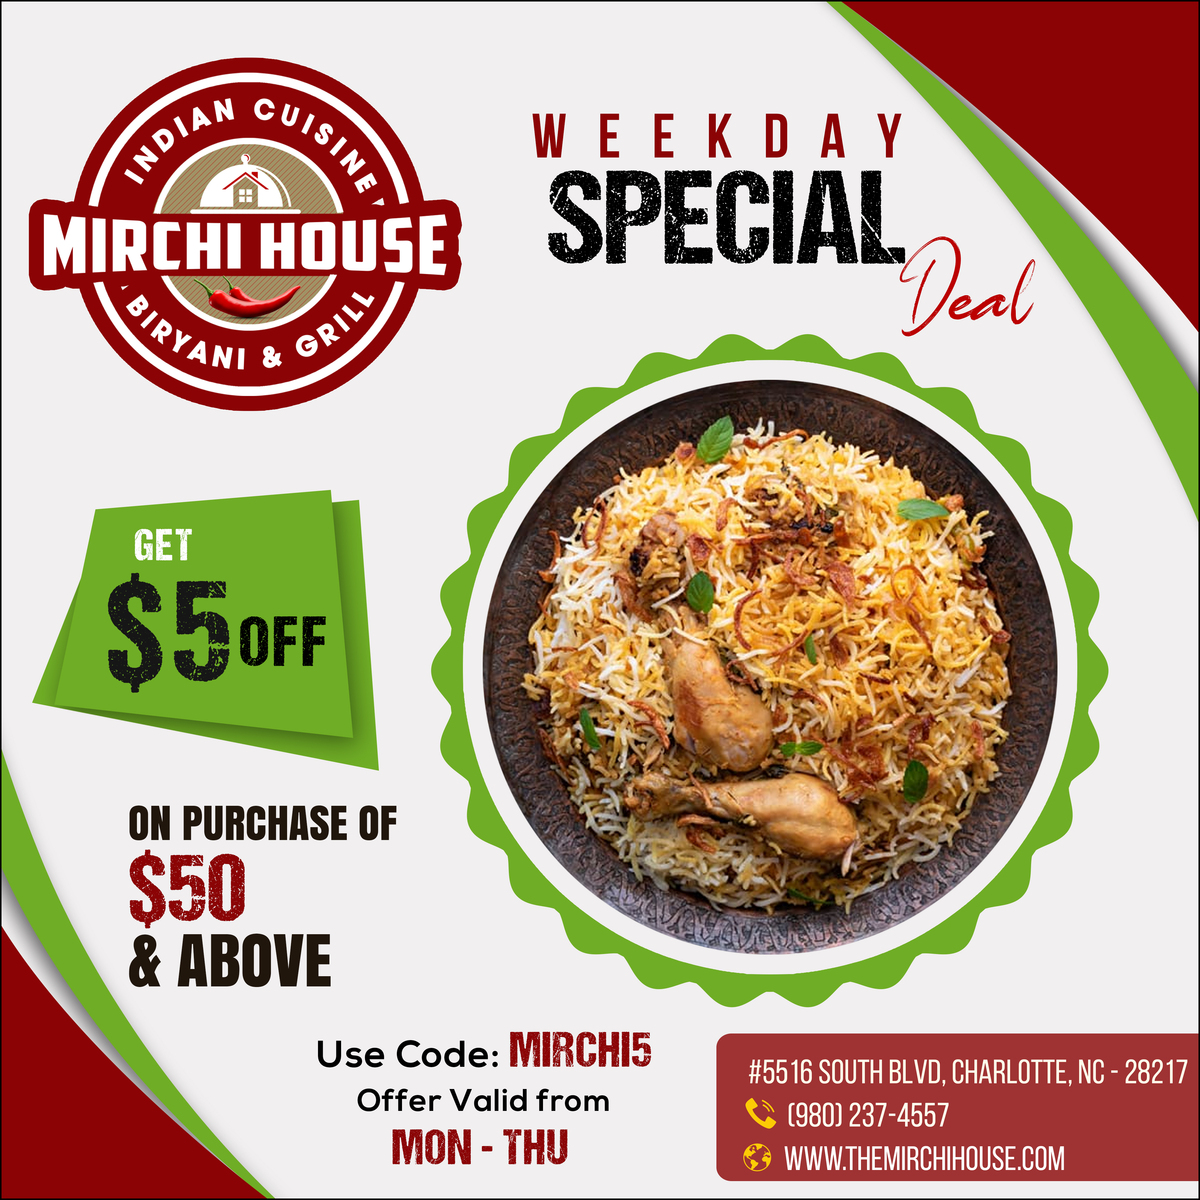 Weekday Special Deal